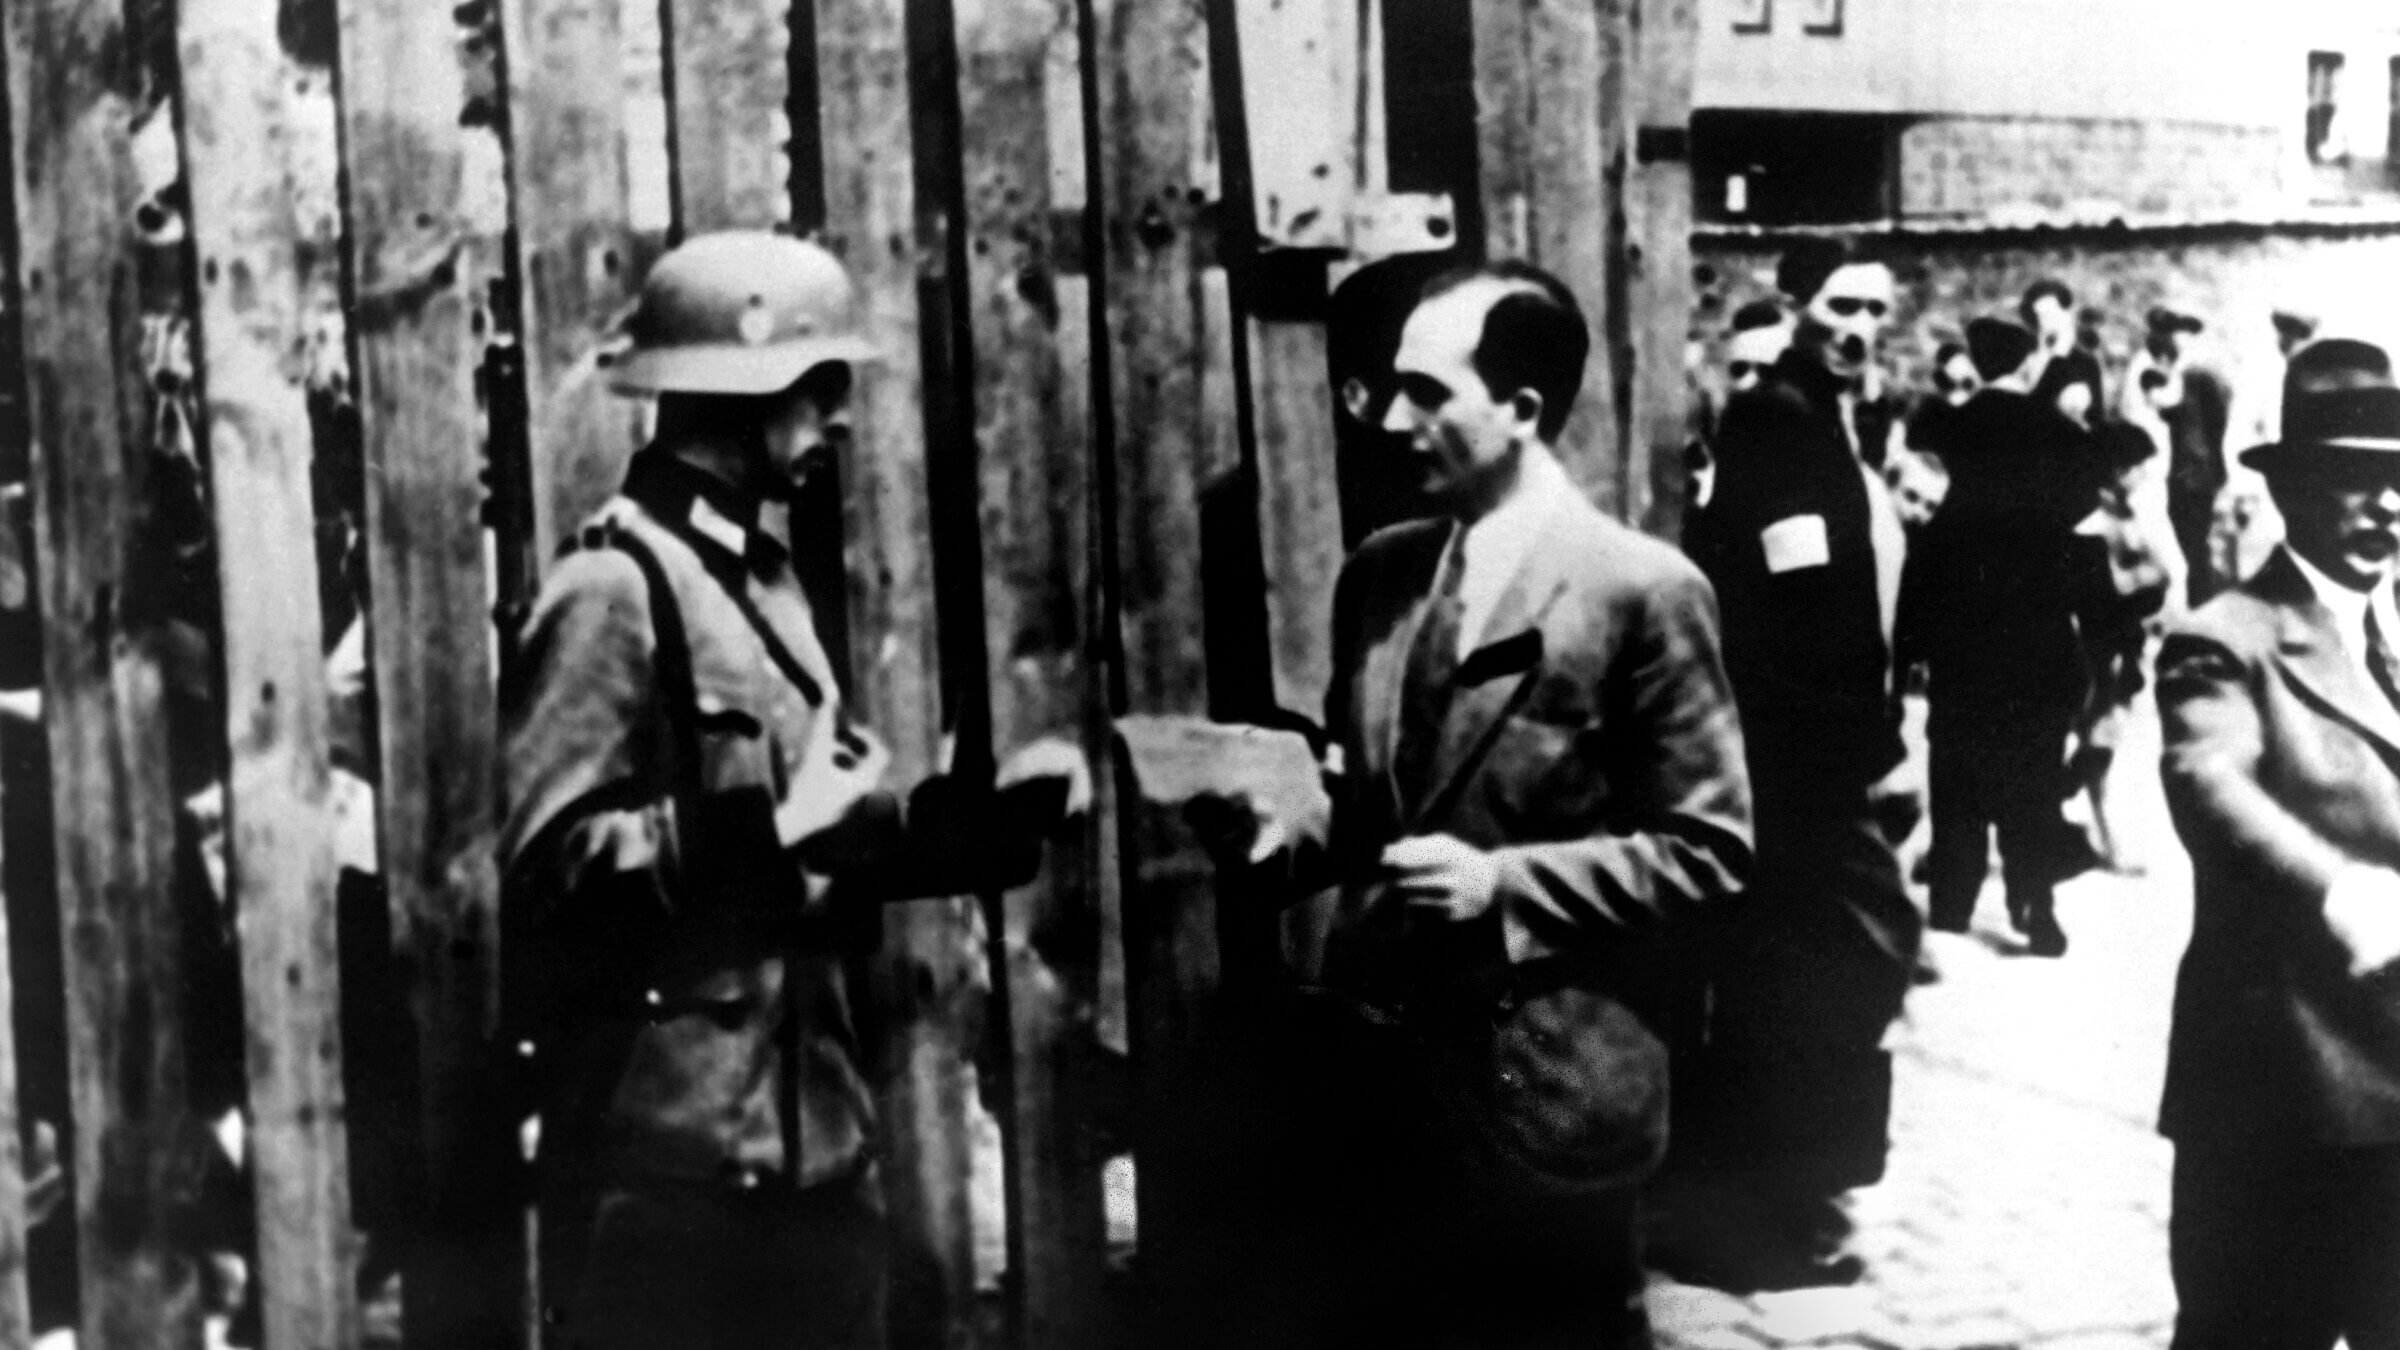 A Nazi soldier checks someone's papers in Warsaw's Jewish ghetto during World War II.